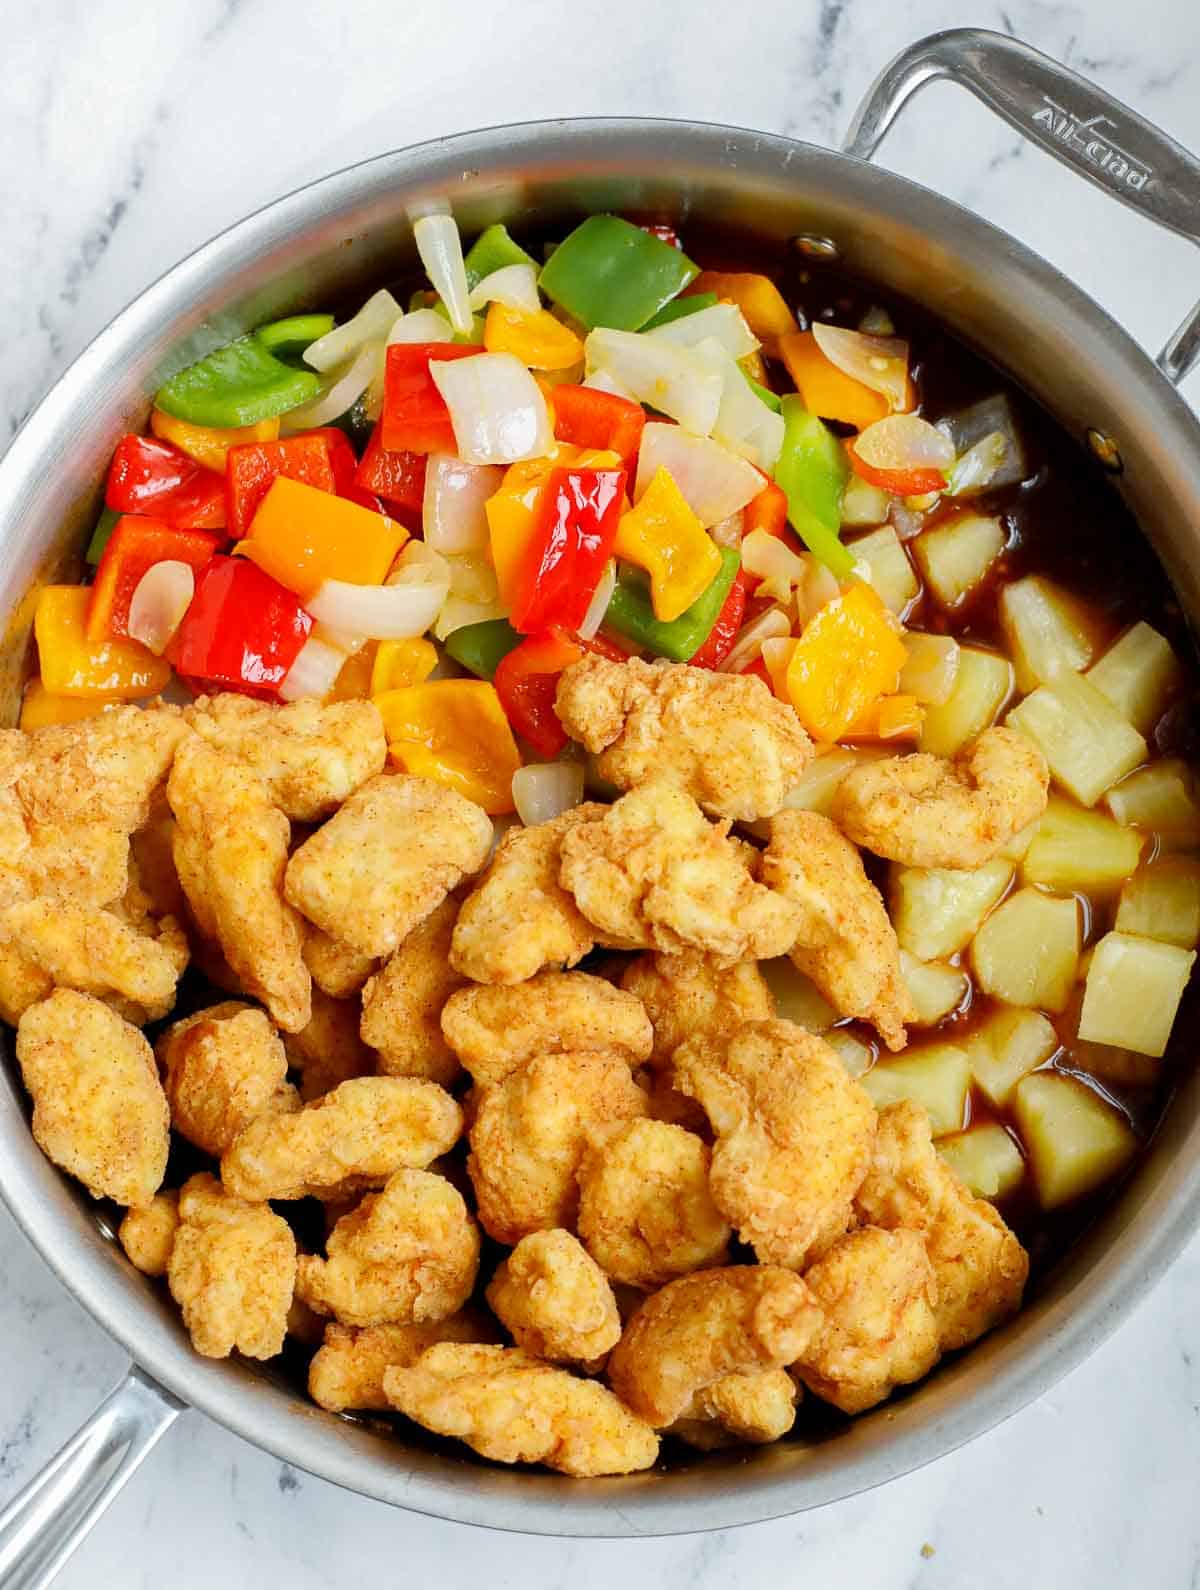 Combining ingredients for Chinese sweet and sour chicken recipe.